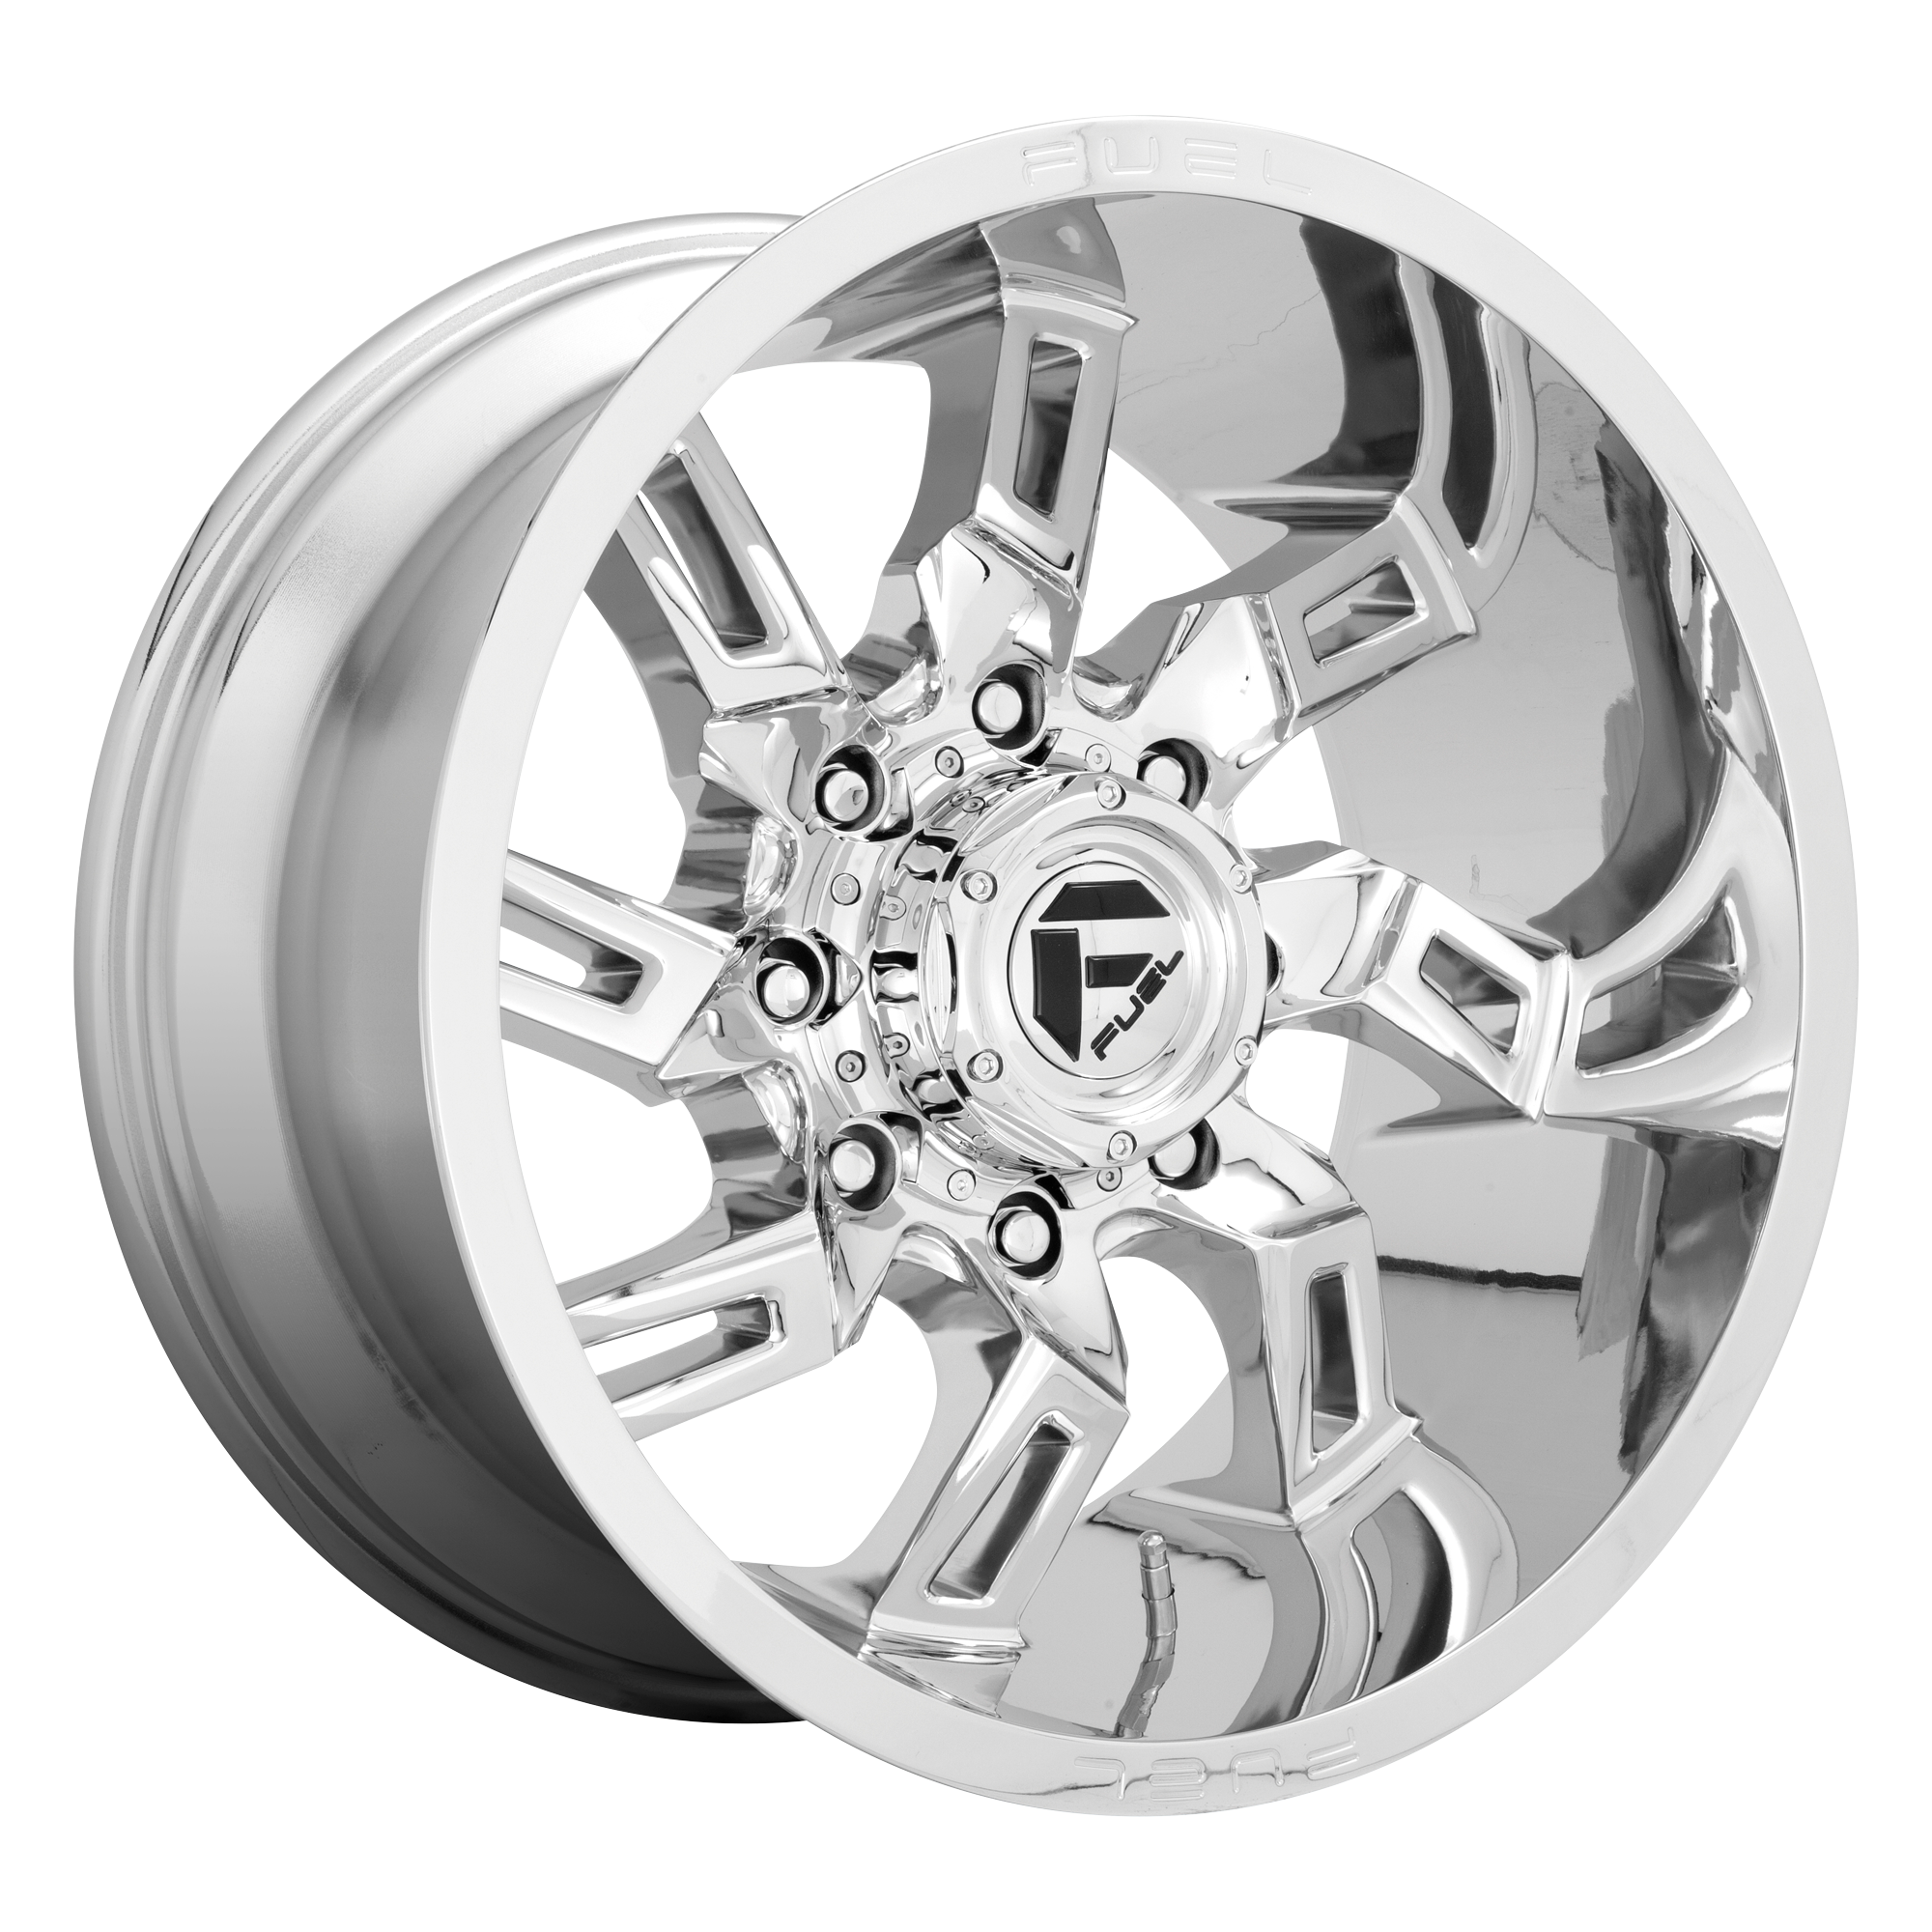 LOCKDOWN 20x9 8x180.00 CHROME (1 mm) - Tires and Engine Performance